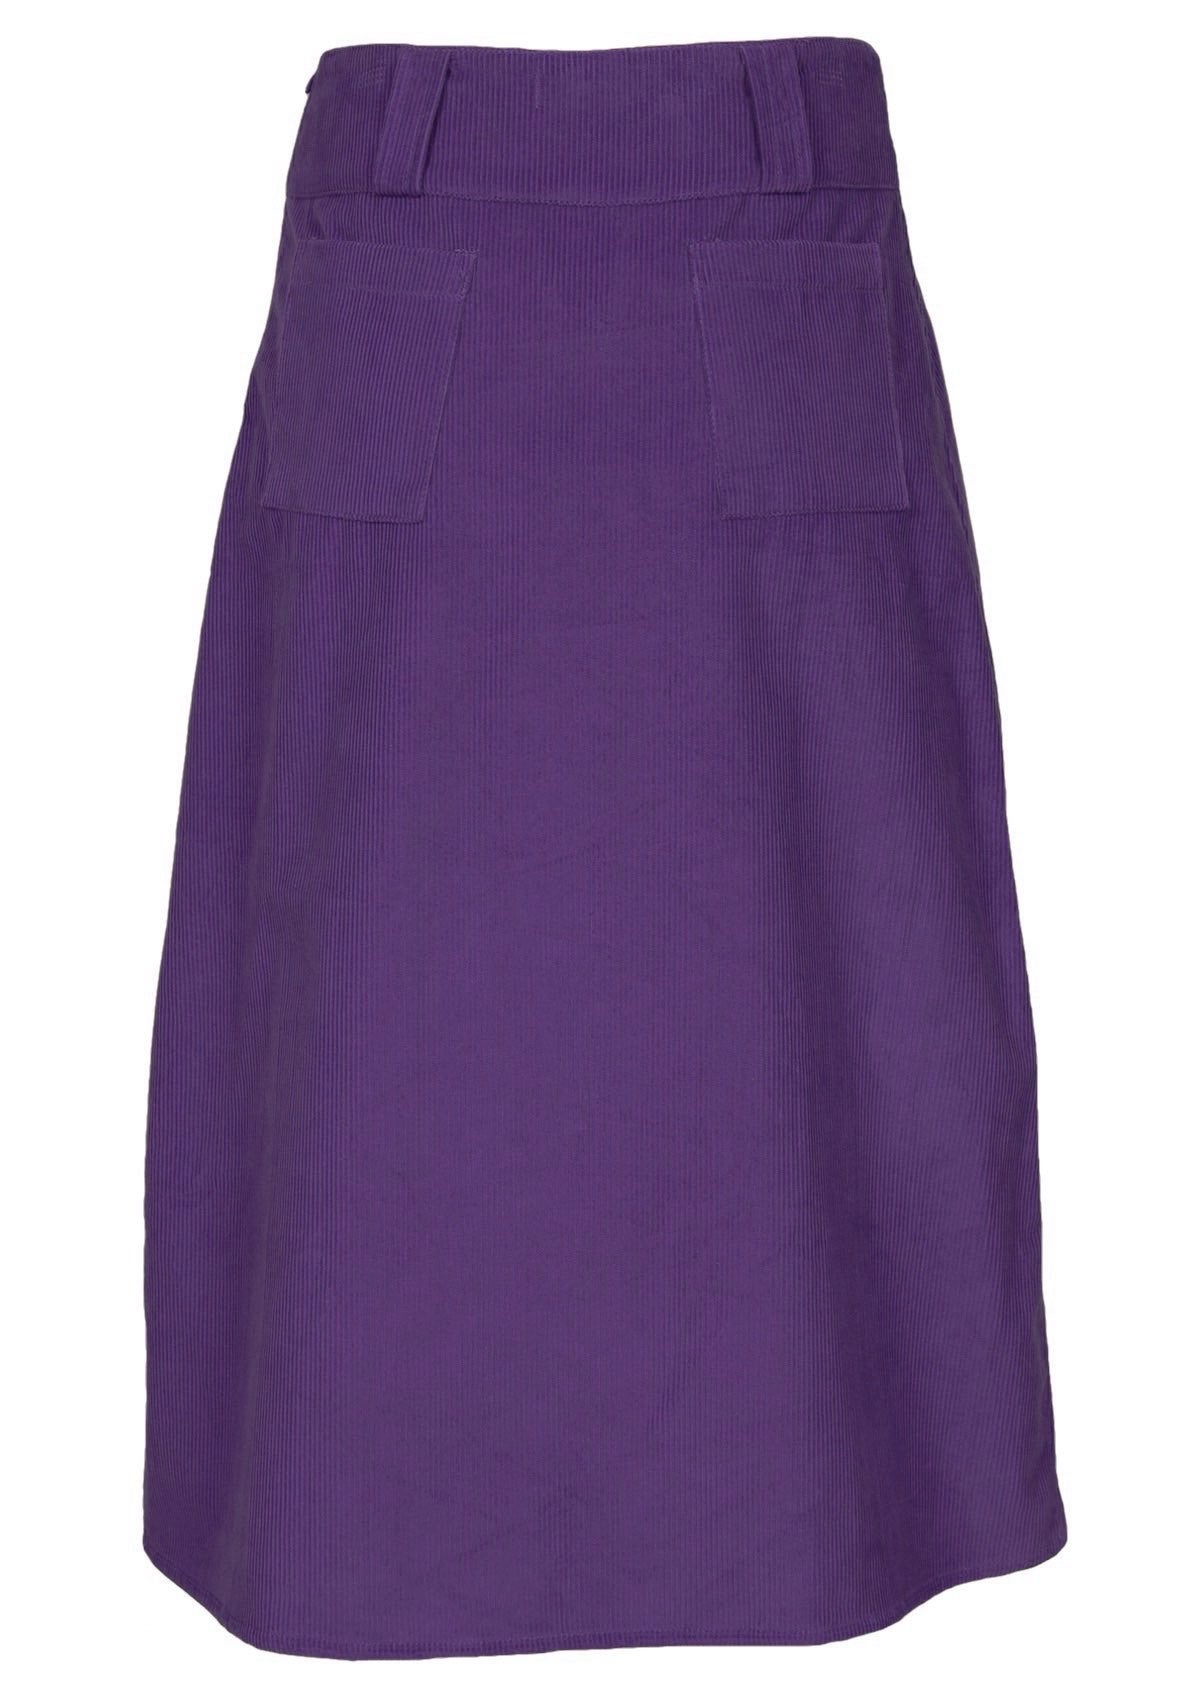 100?% cotton corduroy skirt in purple with a side zip 